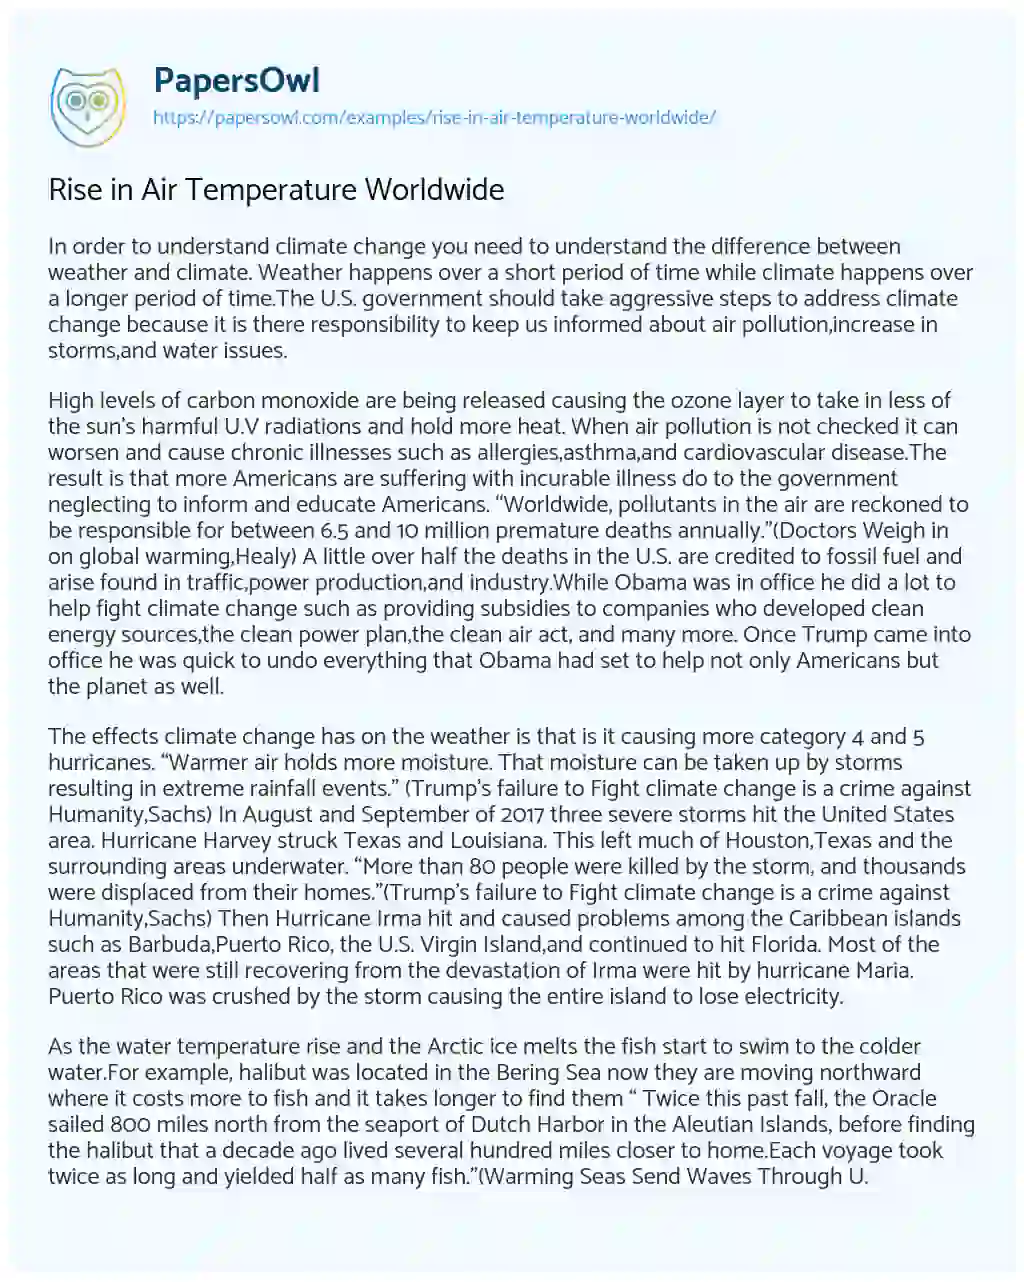 Essay on Rise in Air Temperature Worldwide